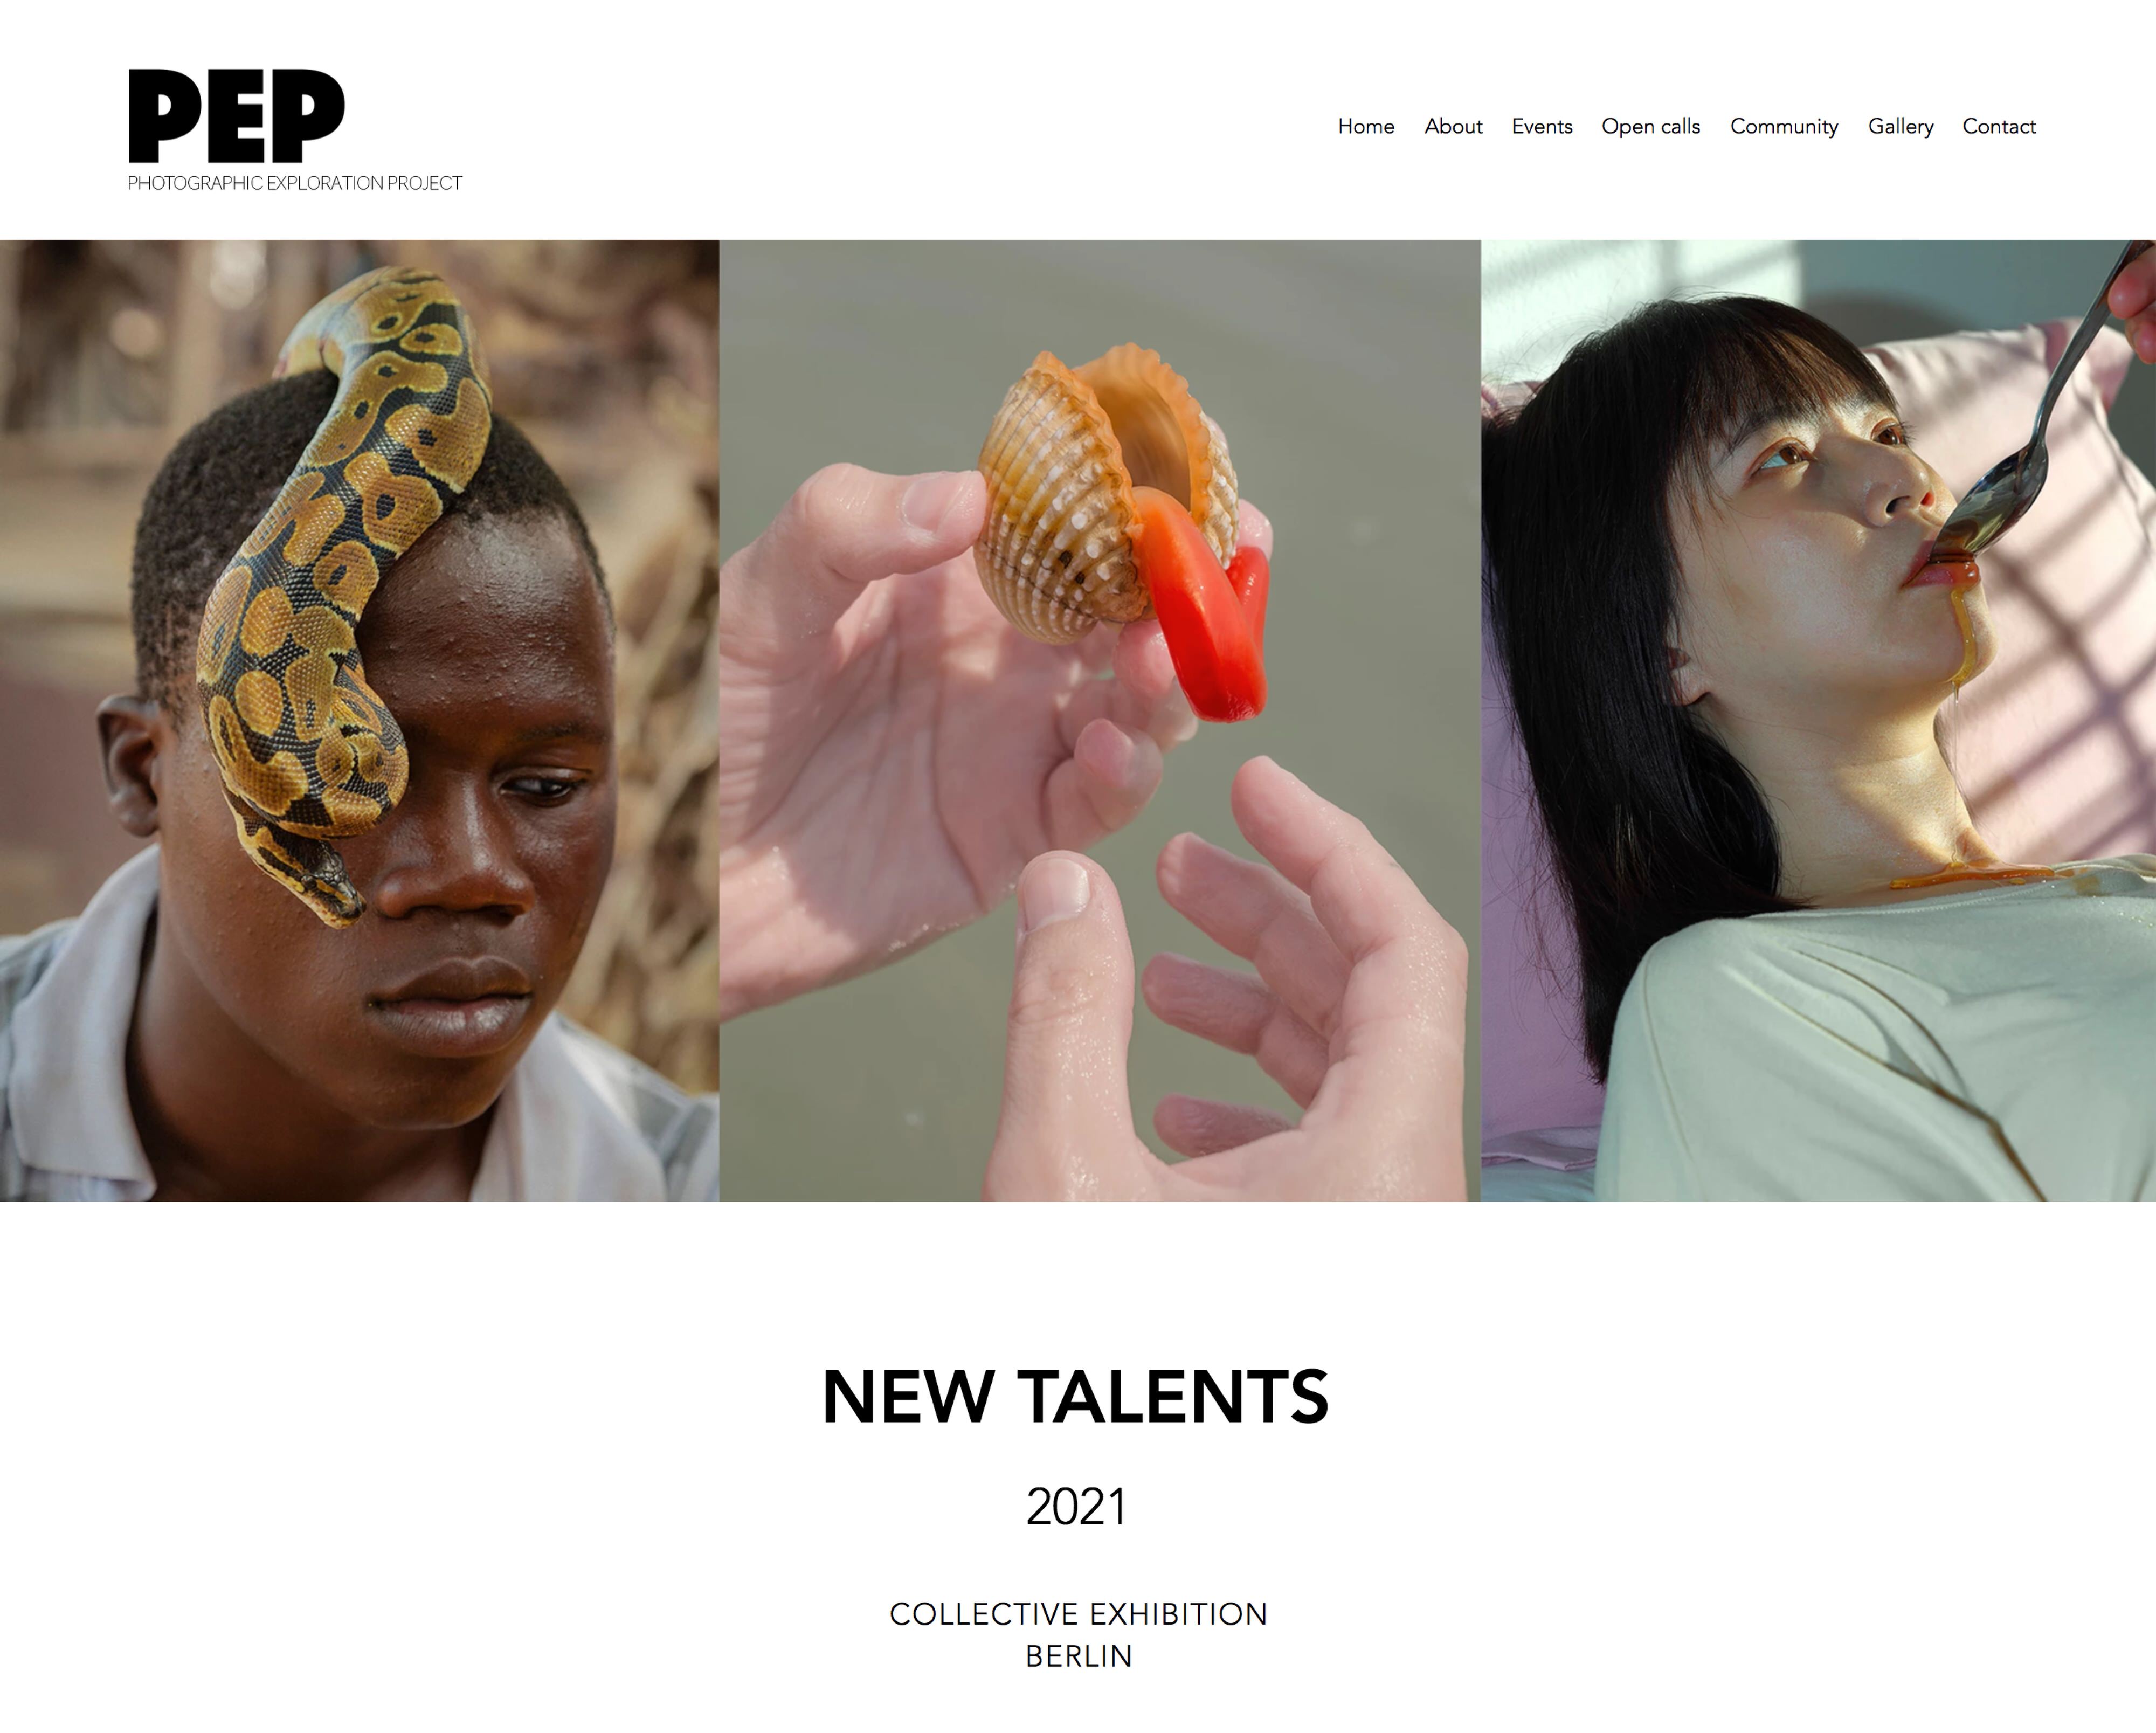 Pep New Talents collective exhibition annoucement with works from Francesco Merlini, Giacomo Bianco, Ruihua Liang